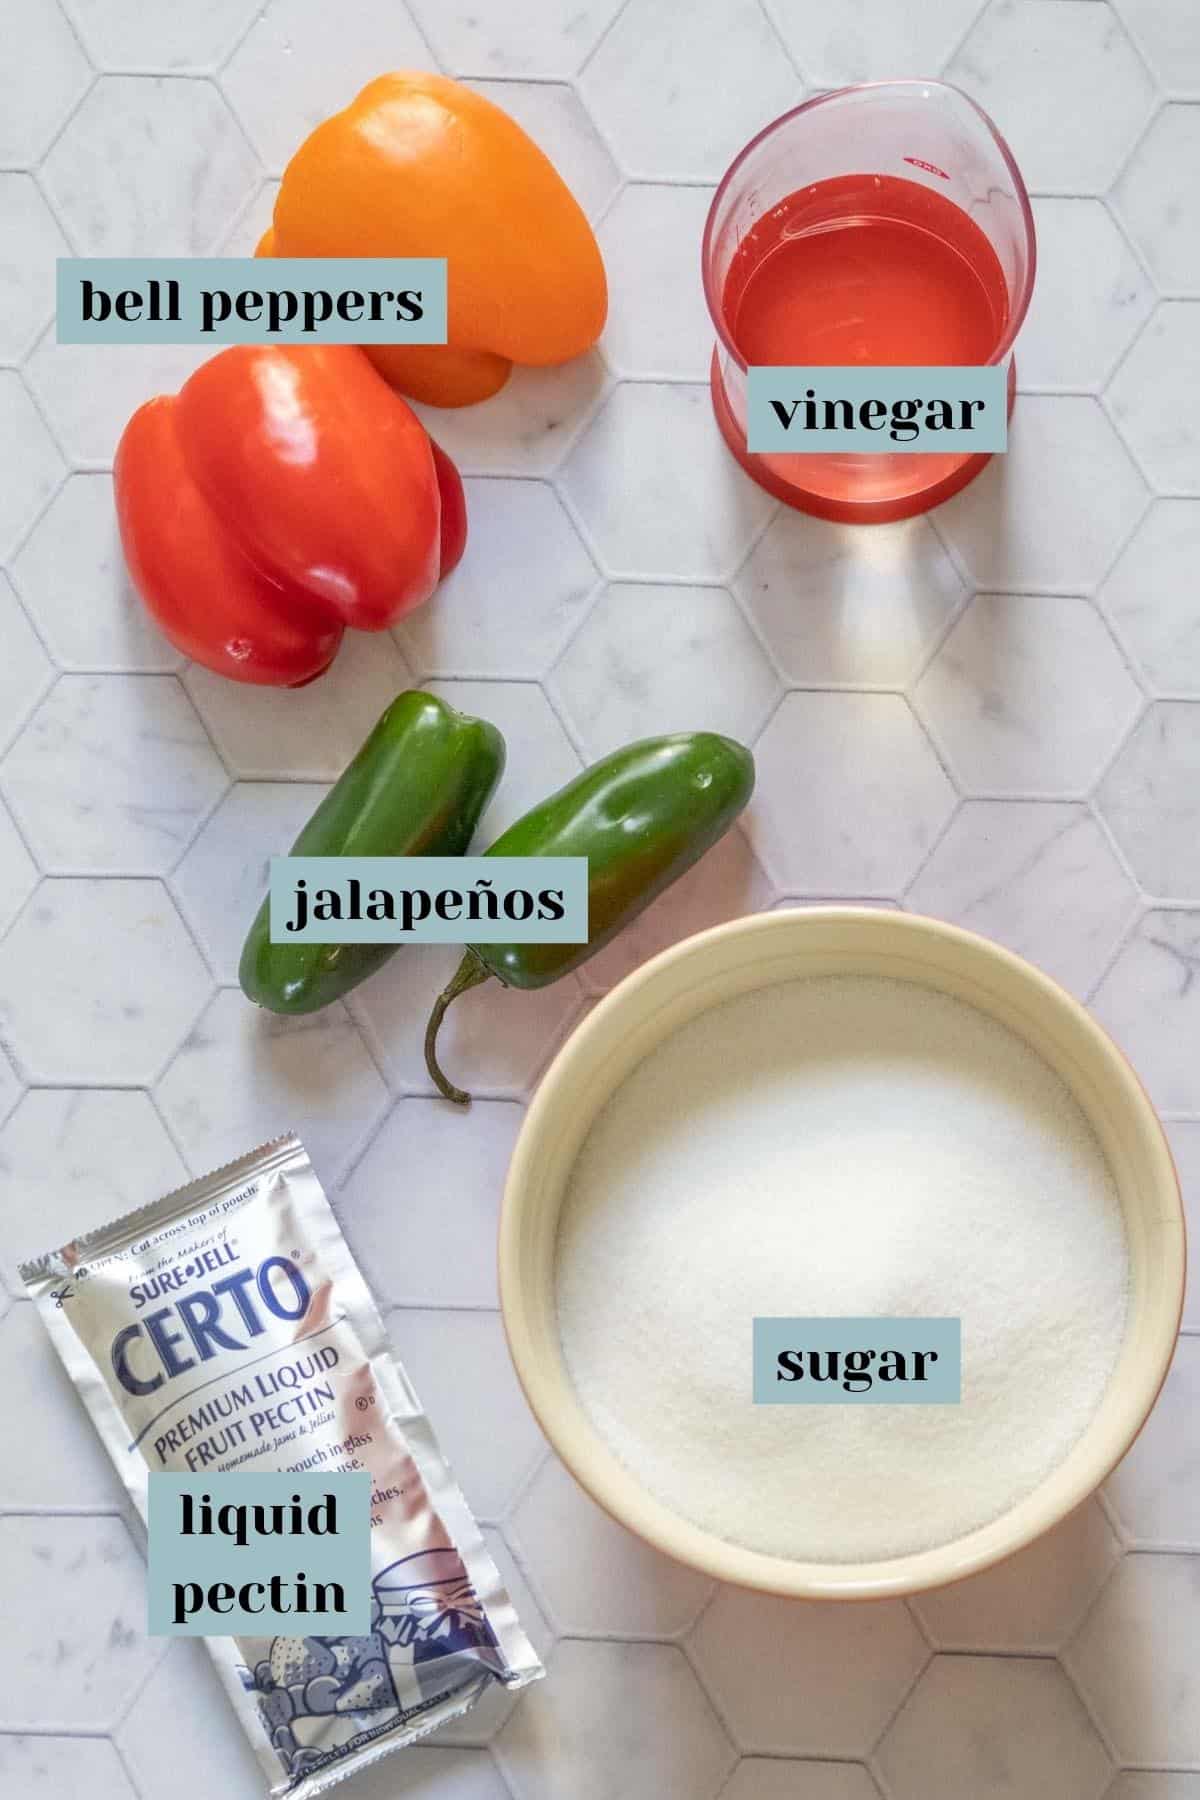 Ingredients for jalapeño jelly on a tile surface with labels.